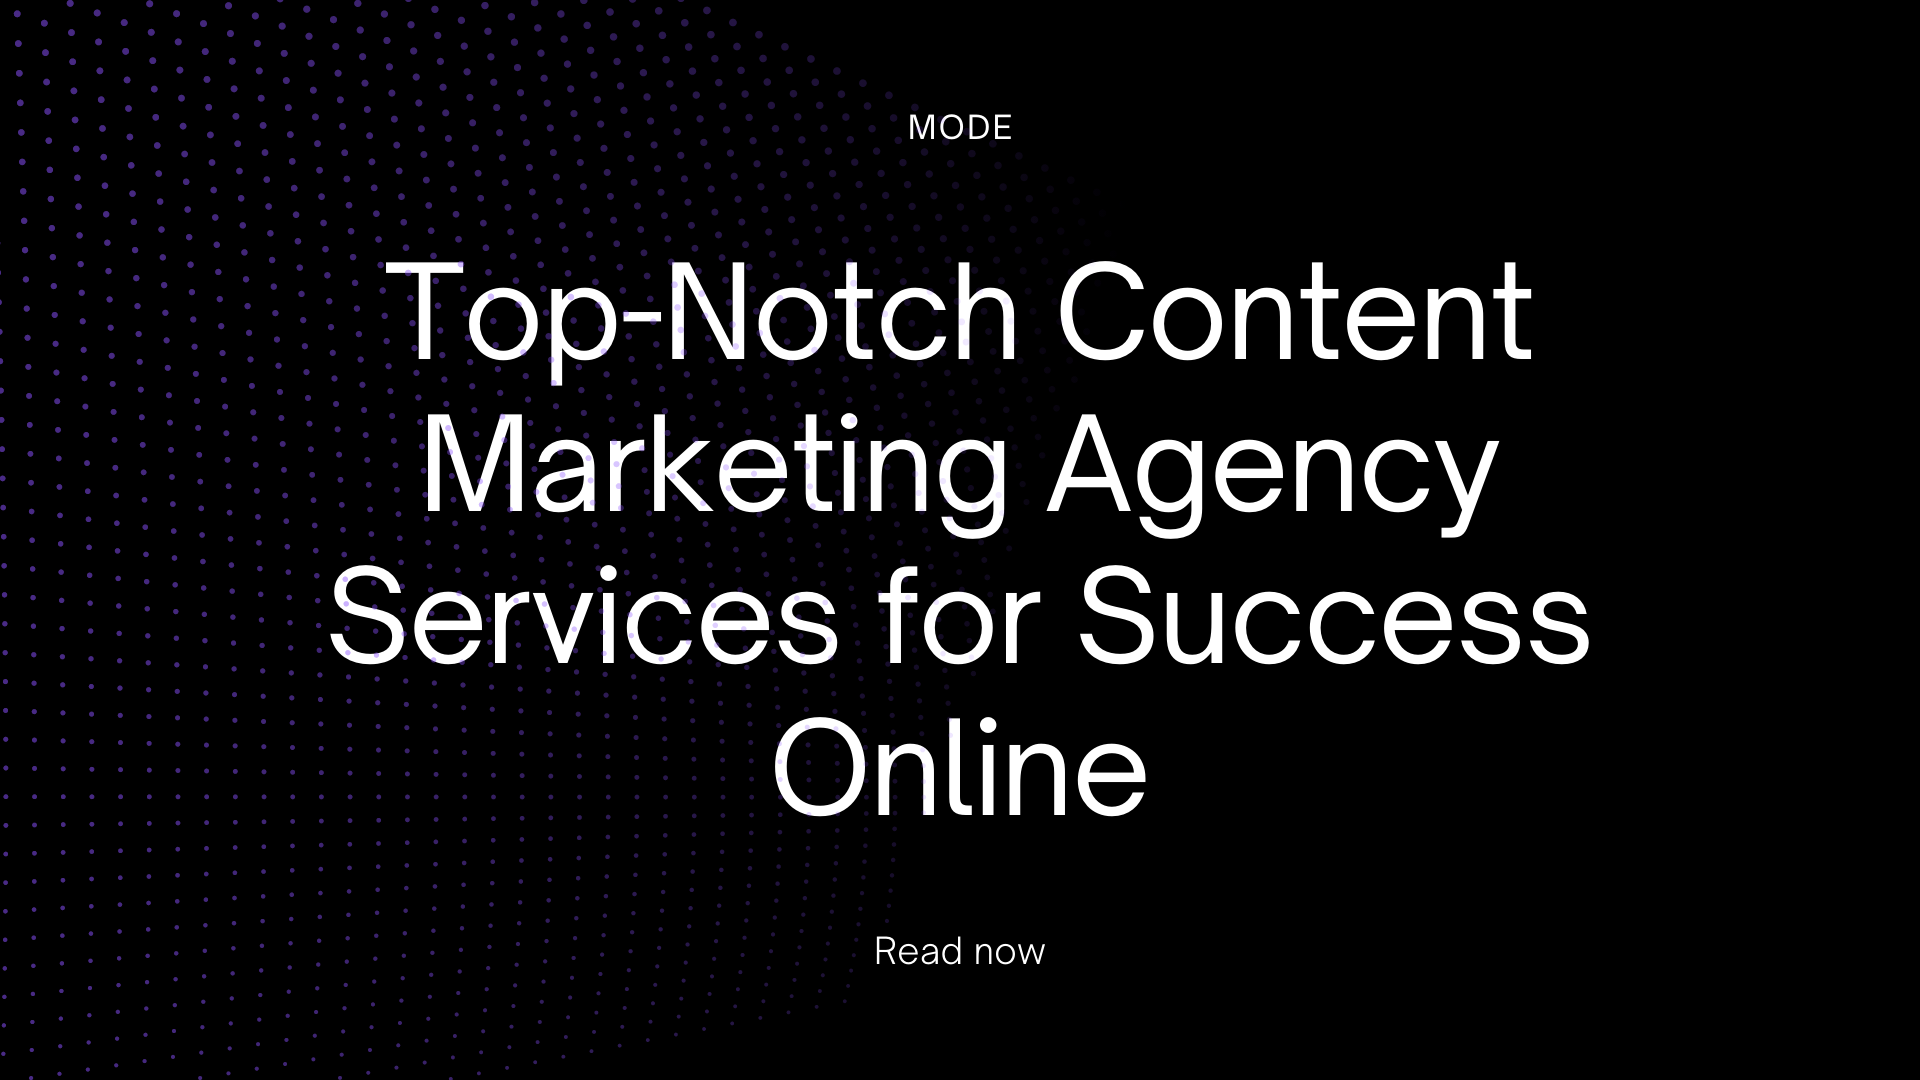 Top-Notch Content Marketing Agency Services for Success Online